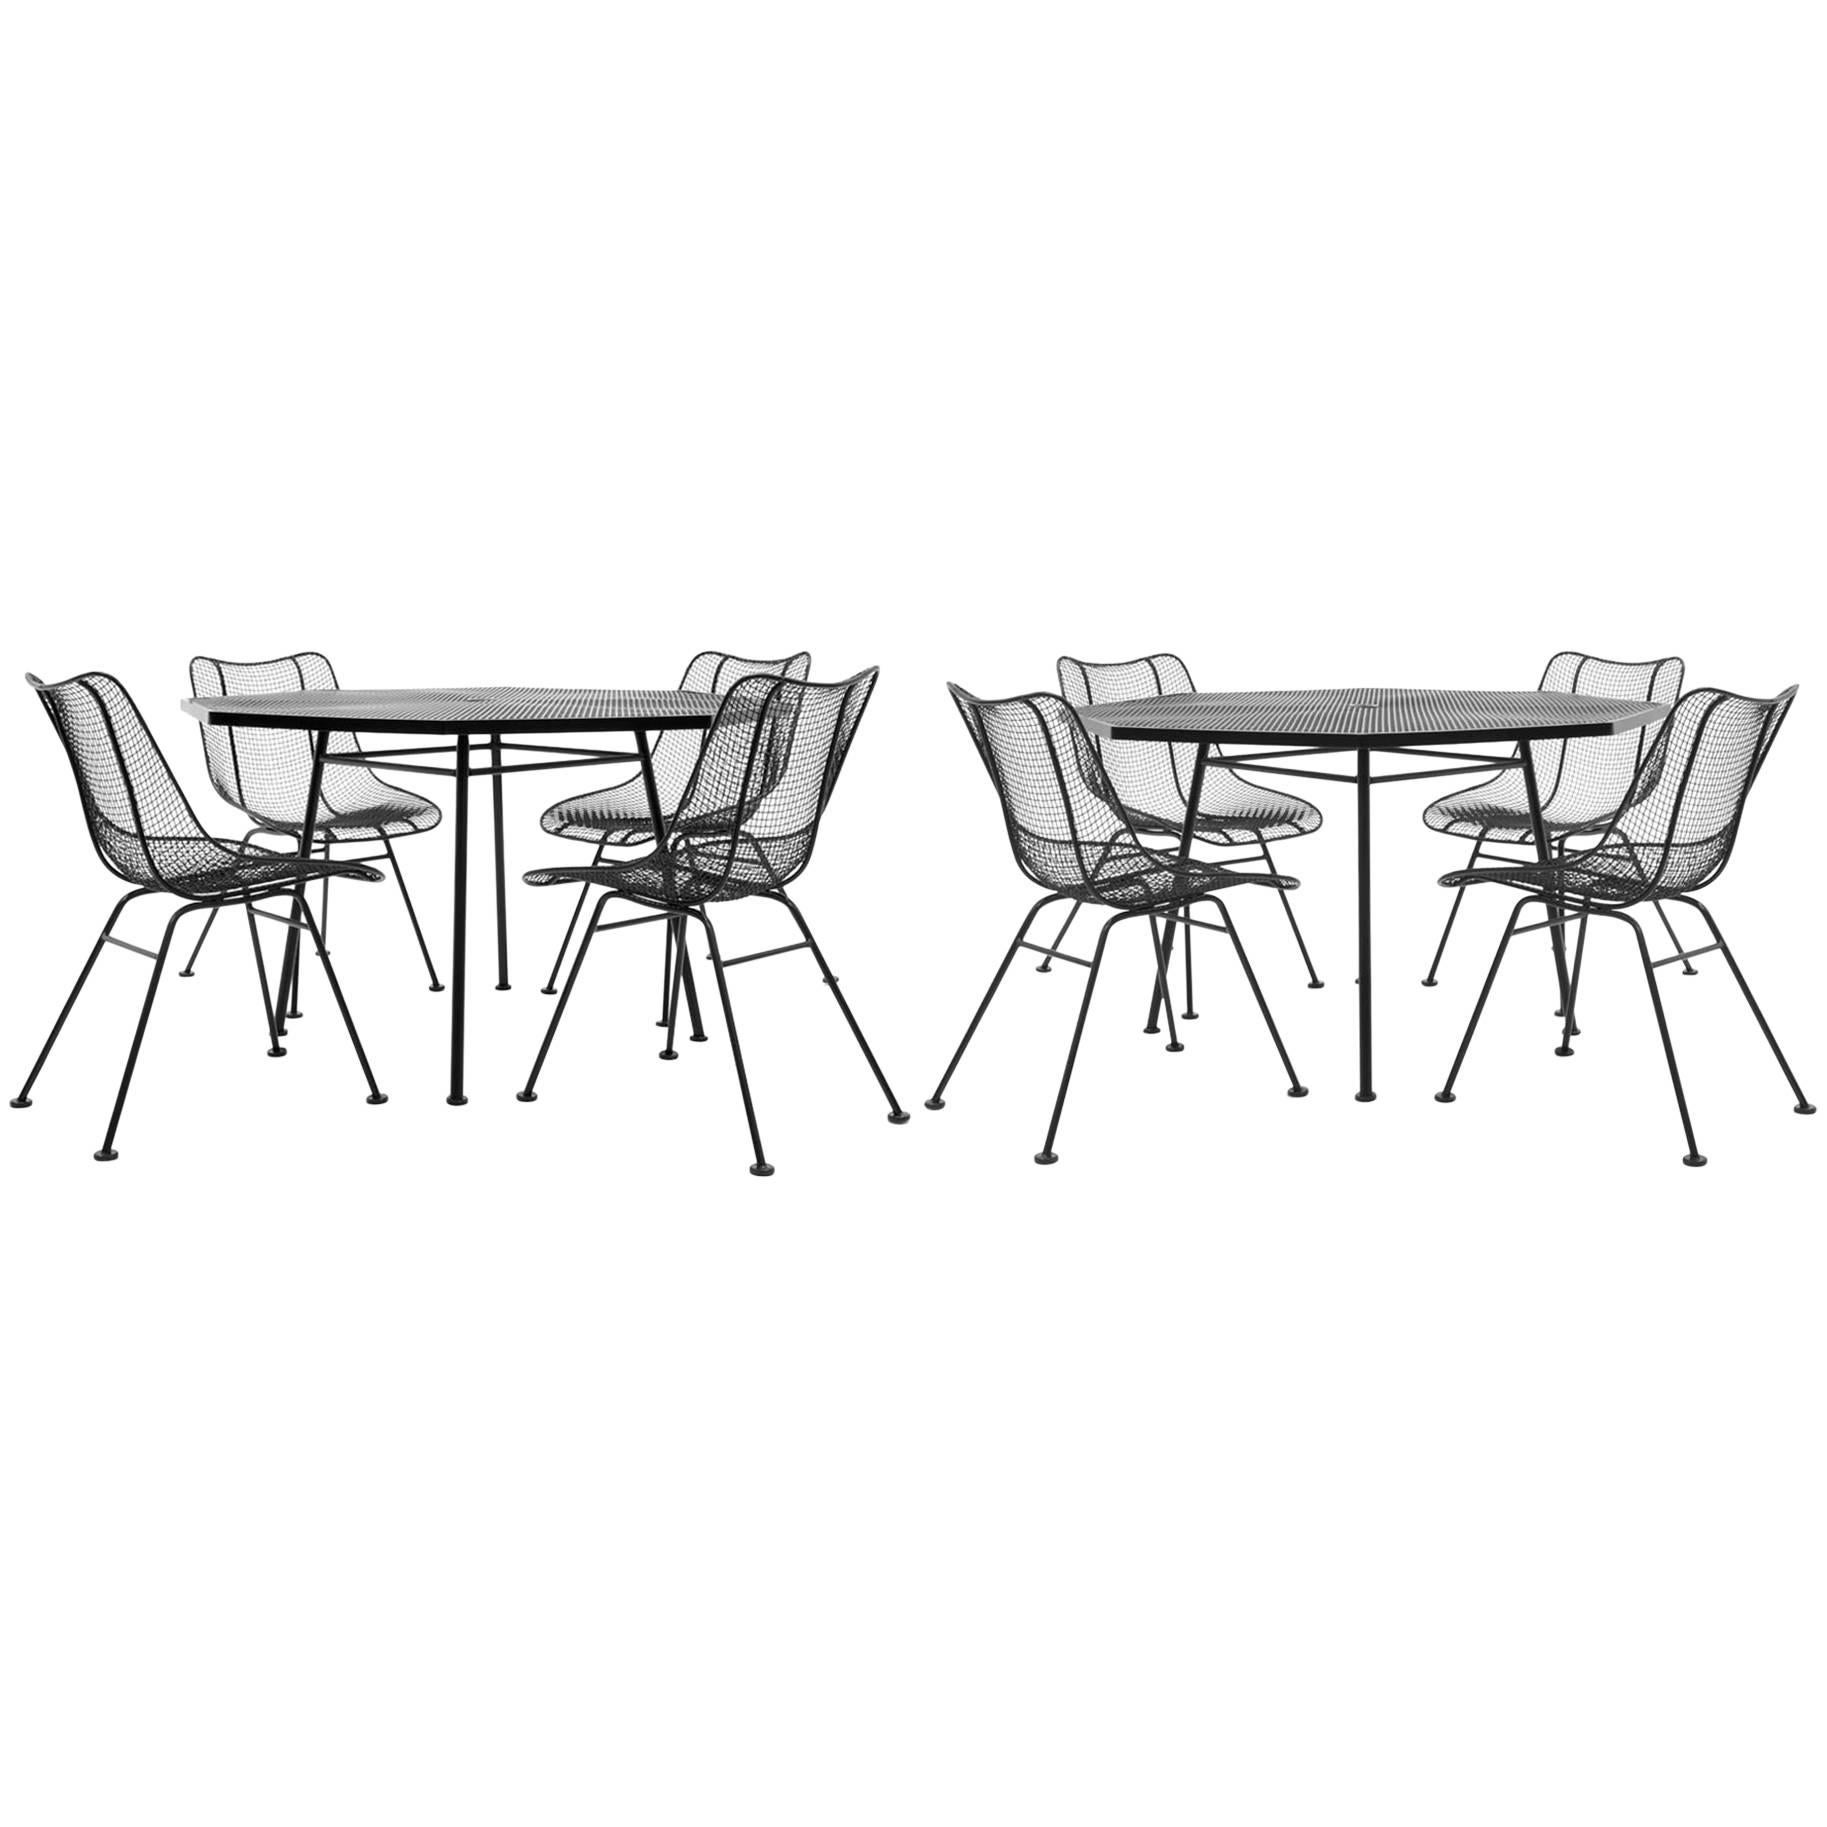 Russell Woodard Sculptura Outdoor/Patio Dining Sets Otagonal Tables Eight Chairs